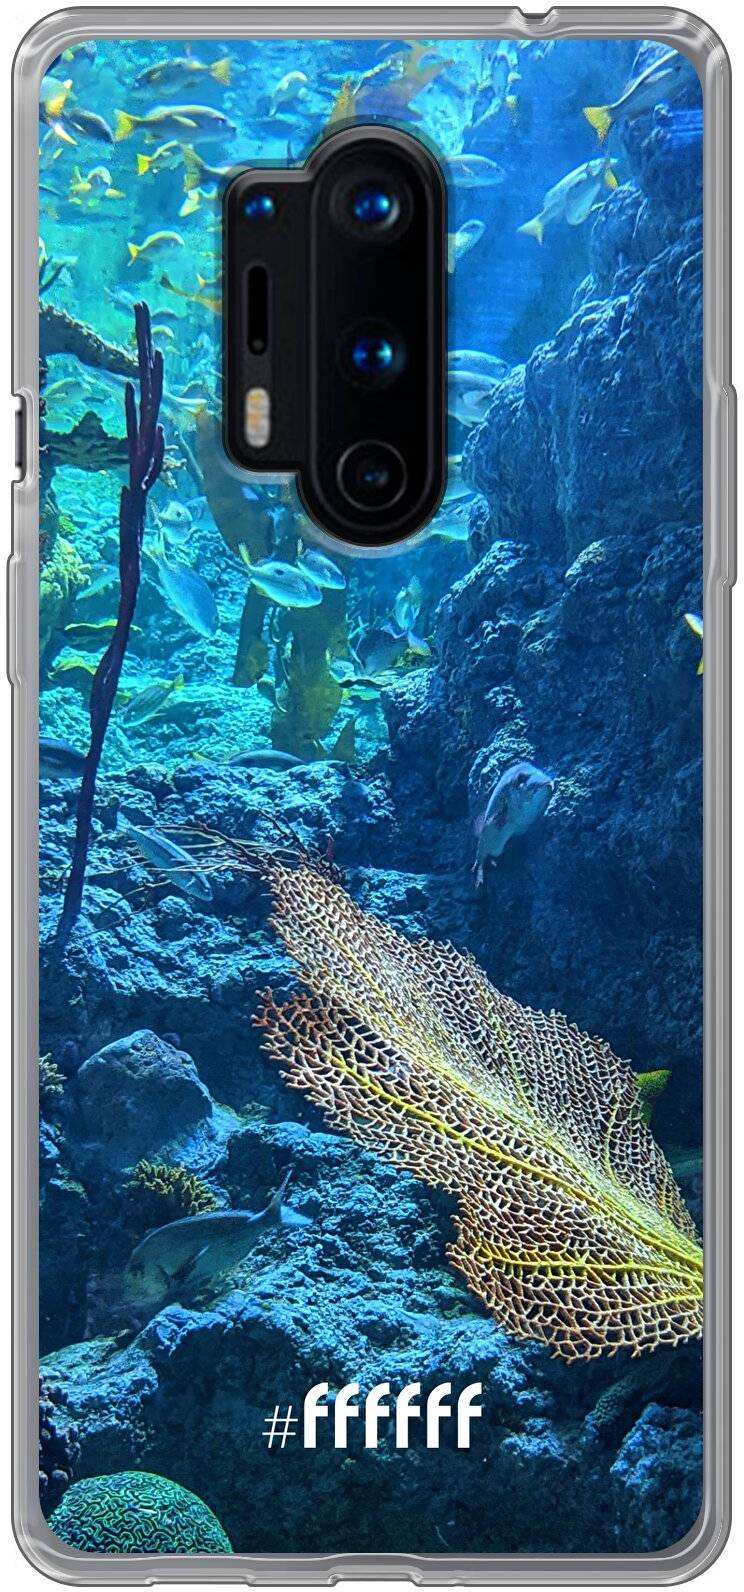 Coral Reef 8 Pro